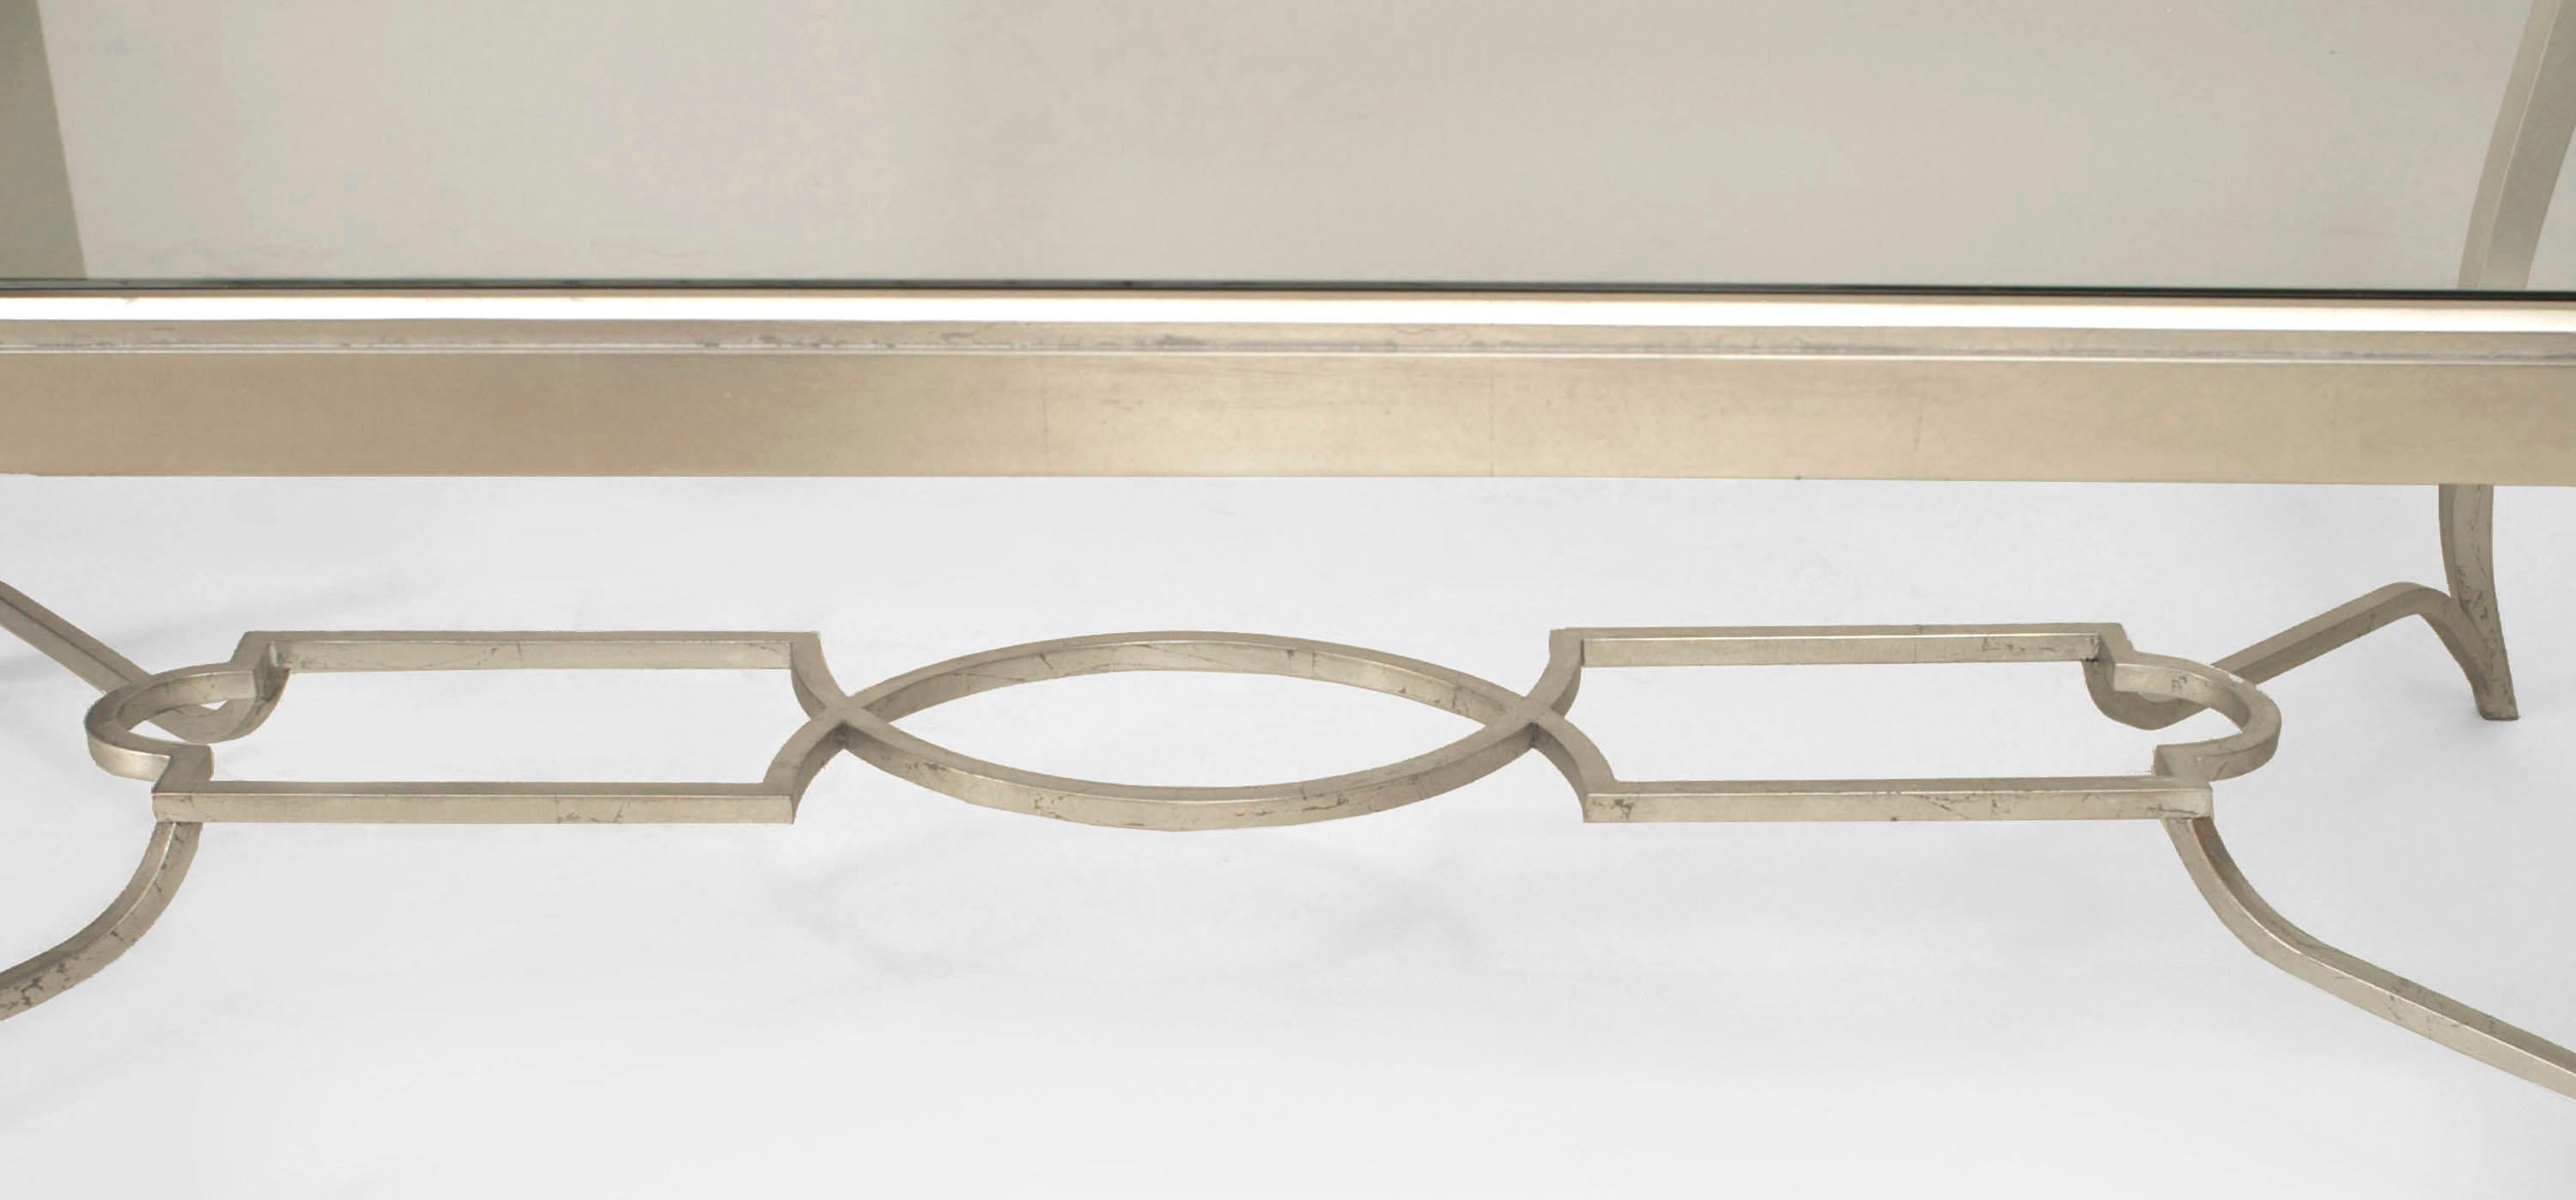 Streamlined Moderne Art Moderne Style Bronze and Glass Coffee Table For Sale